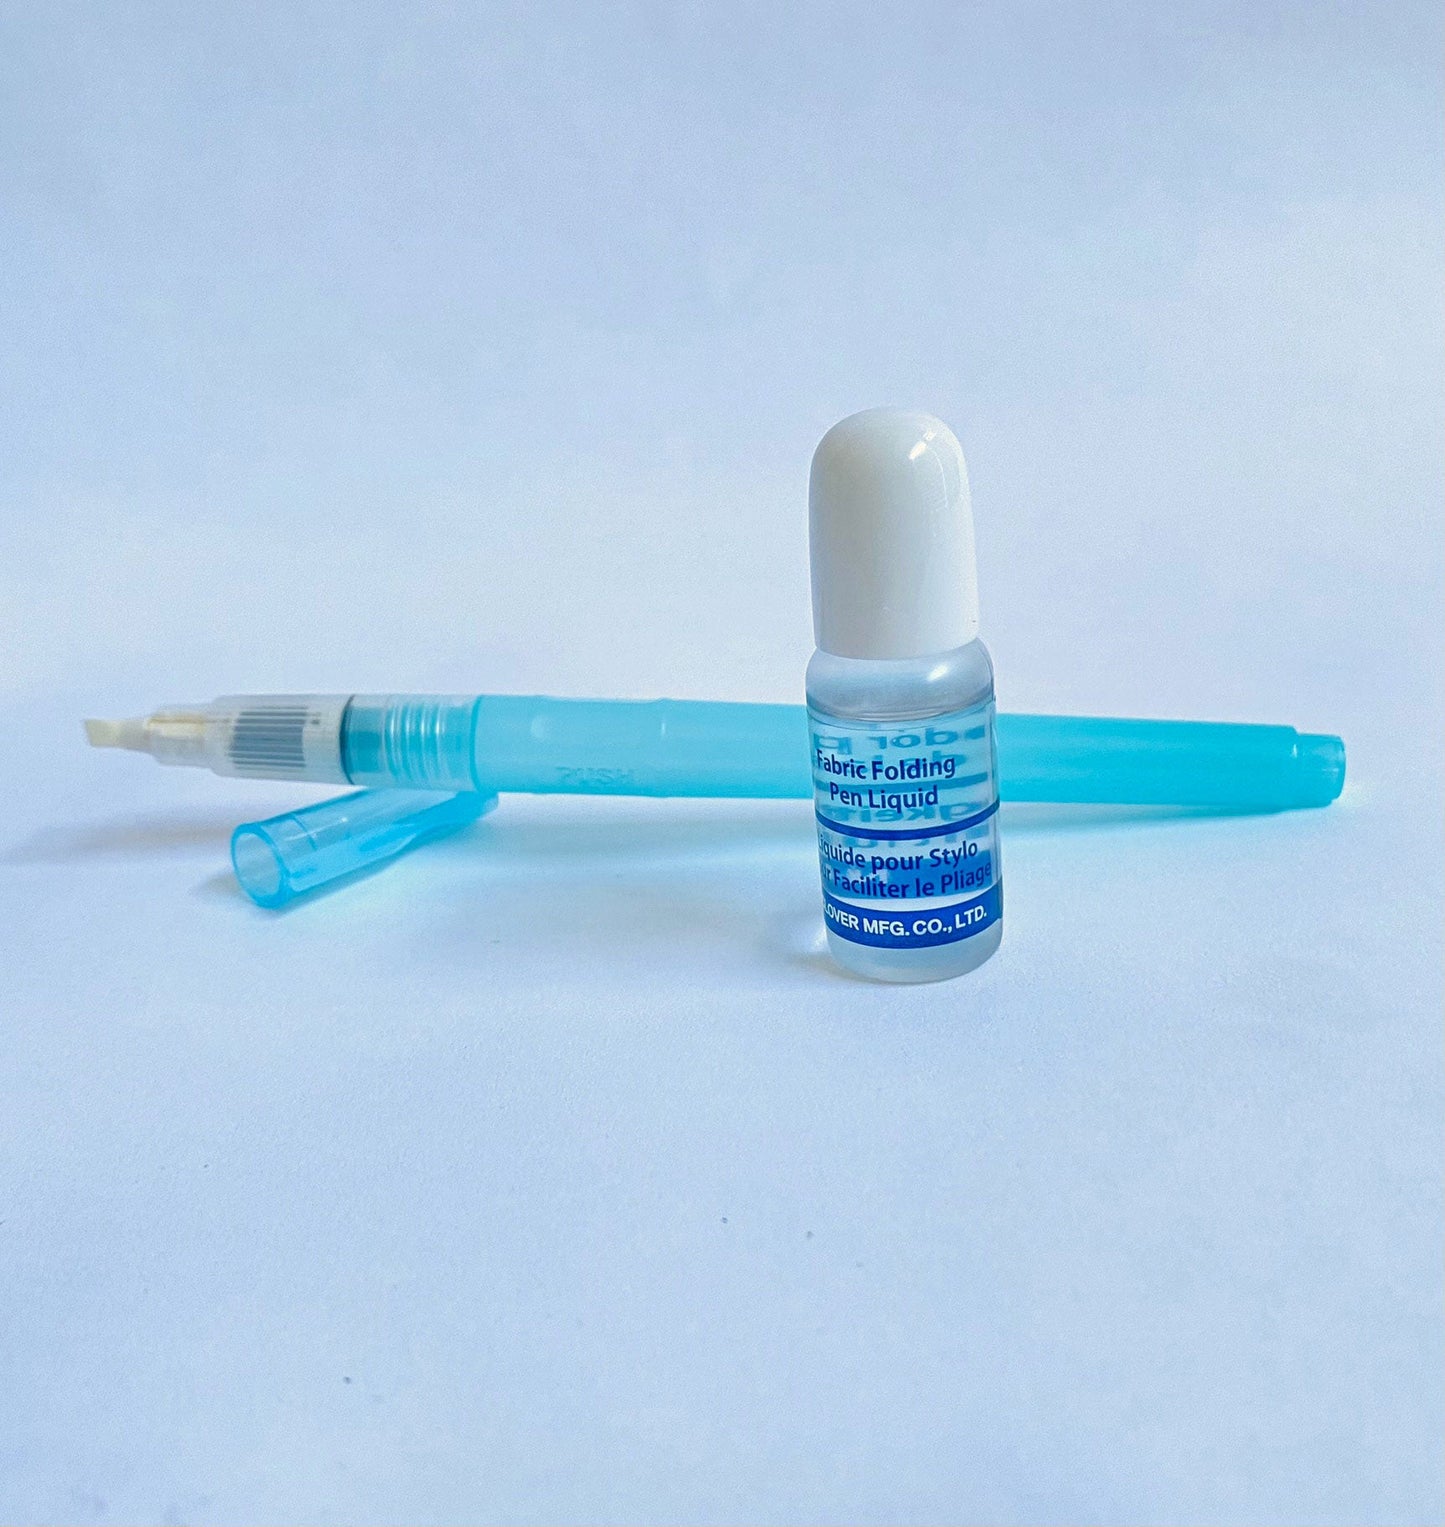 The Fabric Folding Pen by Clover with special applicator tip comes with a small bottle of solution. The applicator tip dispenses the diluted solution in a fine or heavy line and makes fabric easier to fold. Use for finger pressing seams, English paper piecing, foundation or paper piecing, and more.